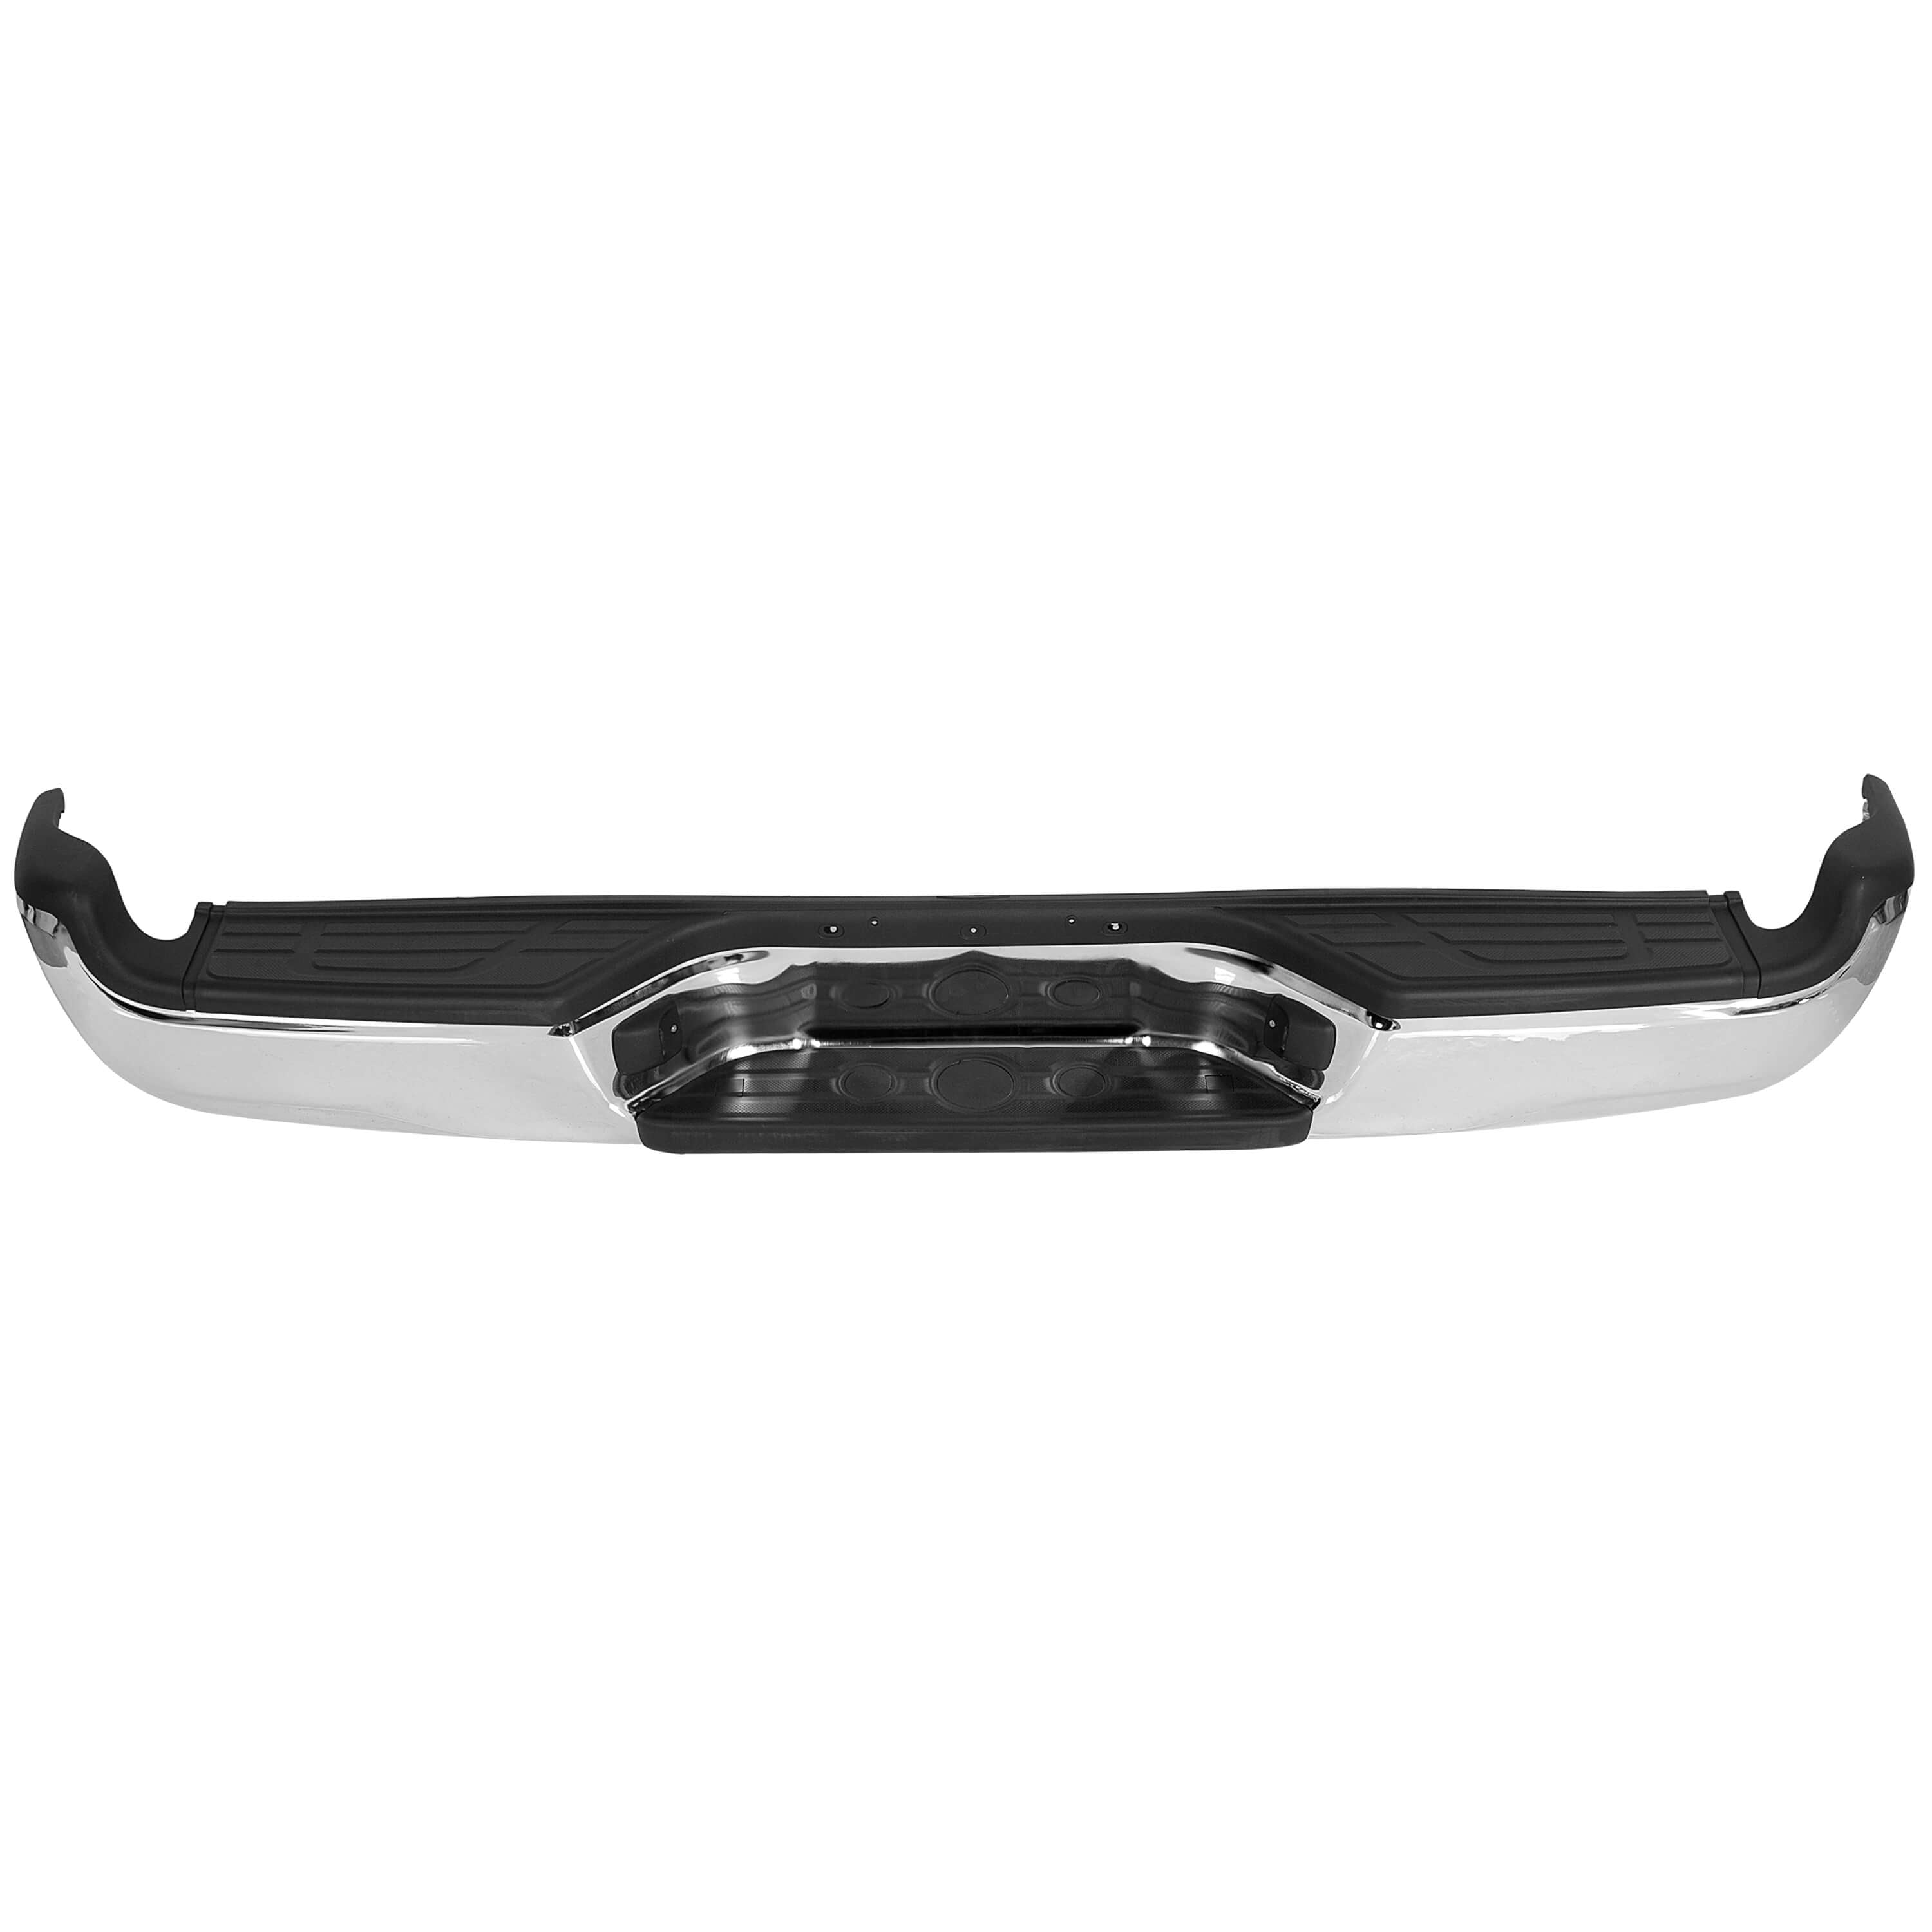 MR.GOP-Rear Step Bumper for 2005-2015 Toyota Tacoma